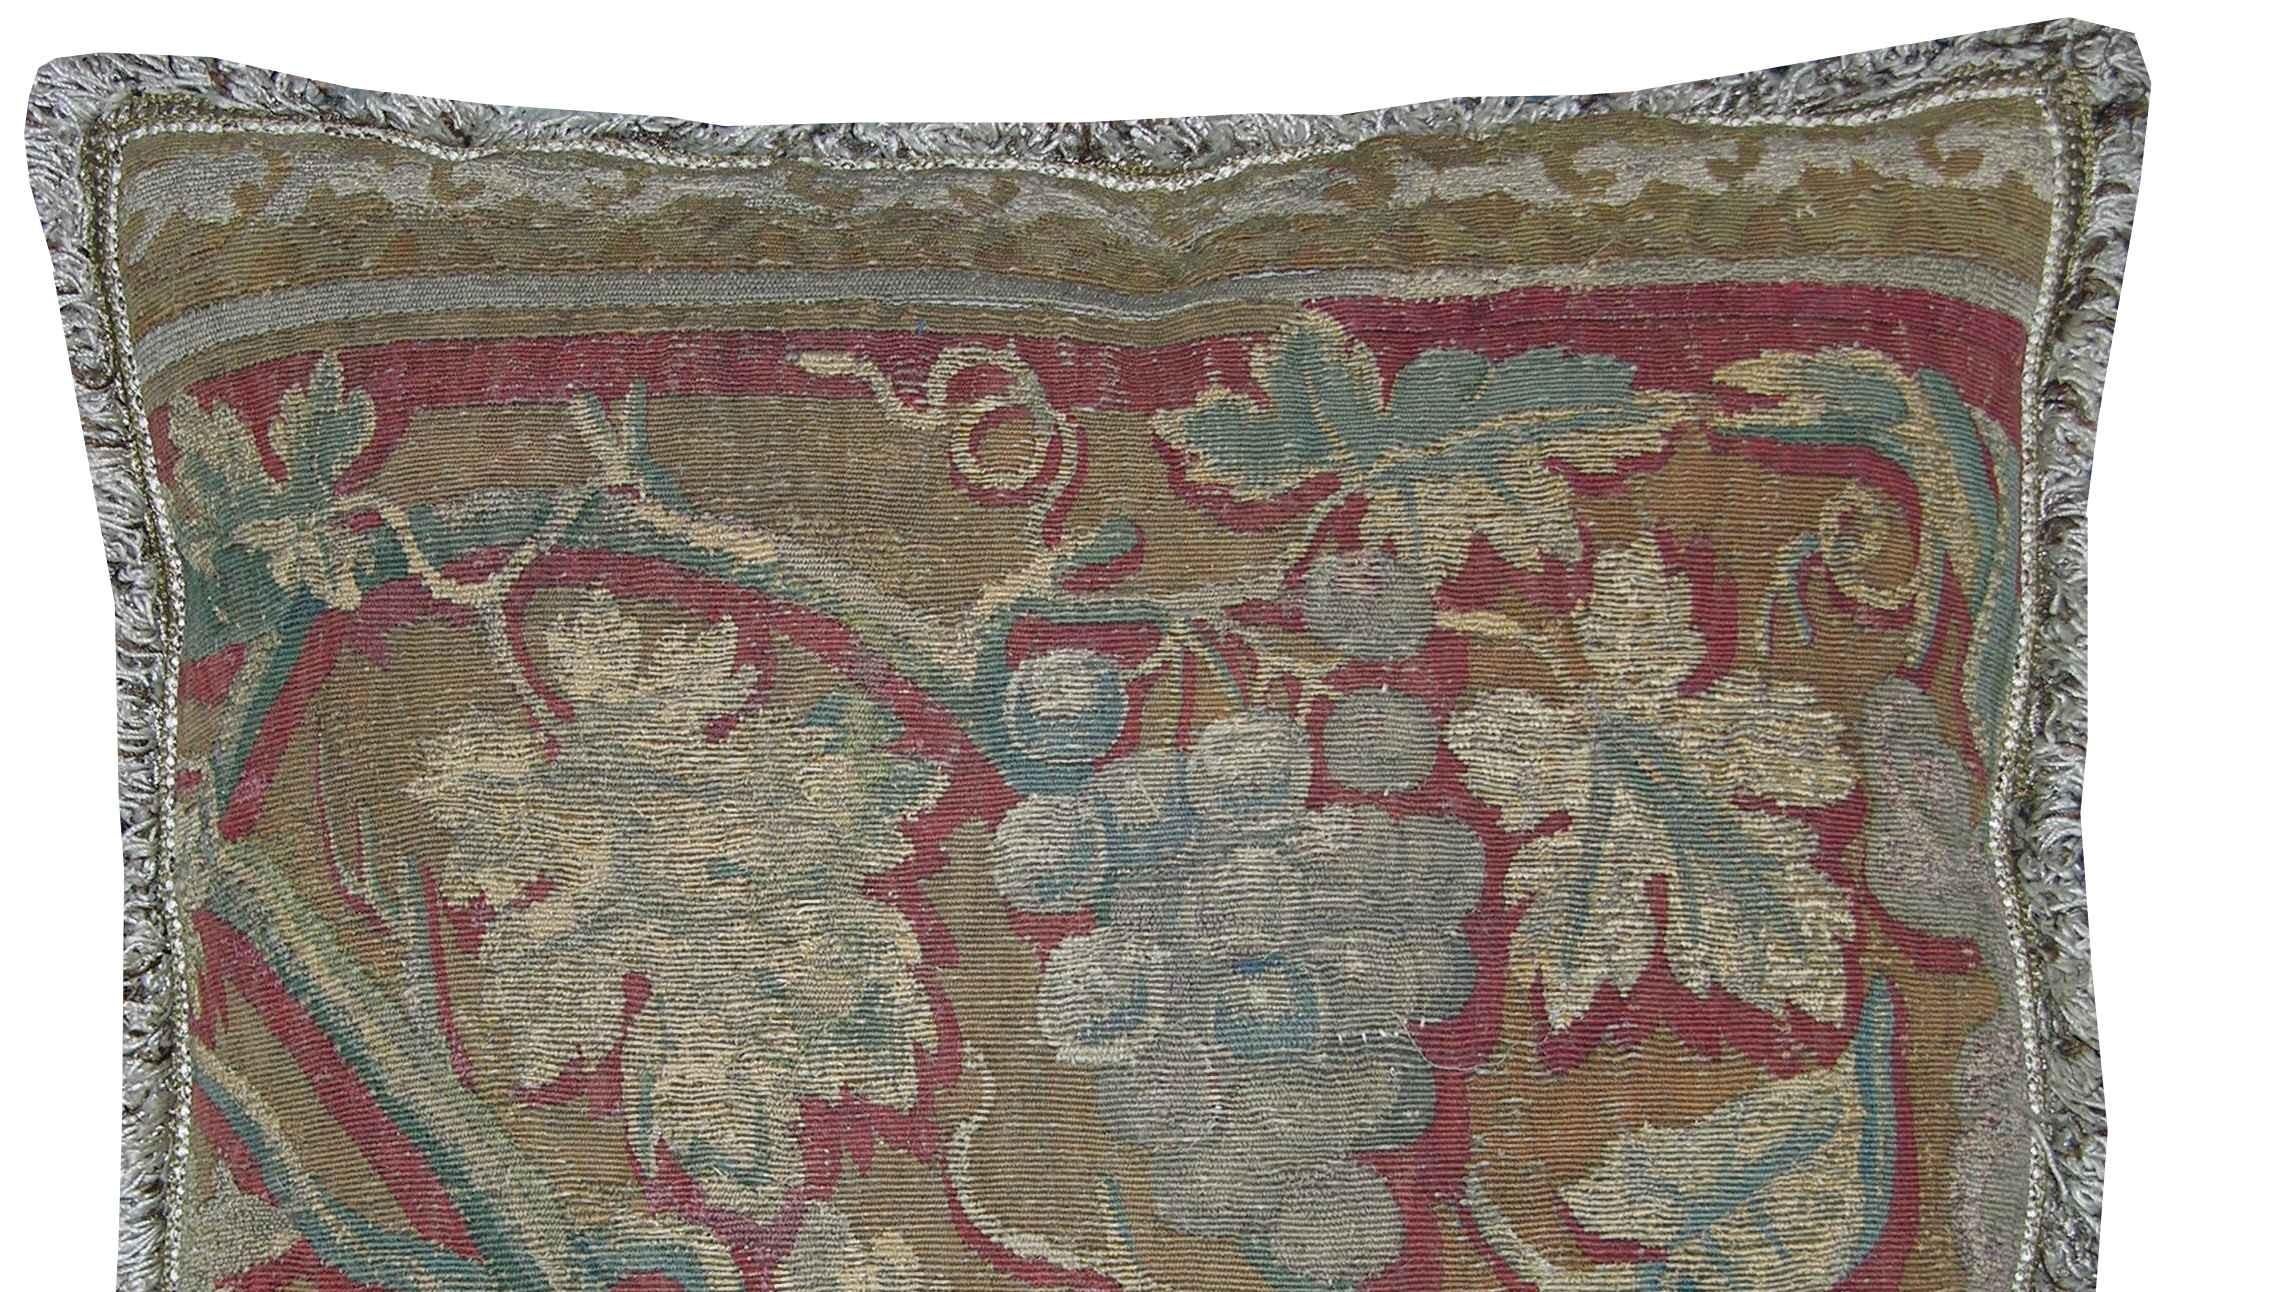 Unknown 17th Century Antique Brussels Tapestry Pillow For Sale